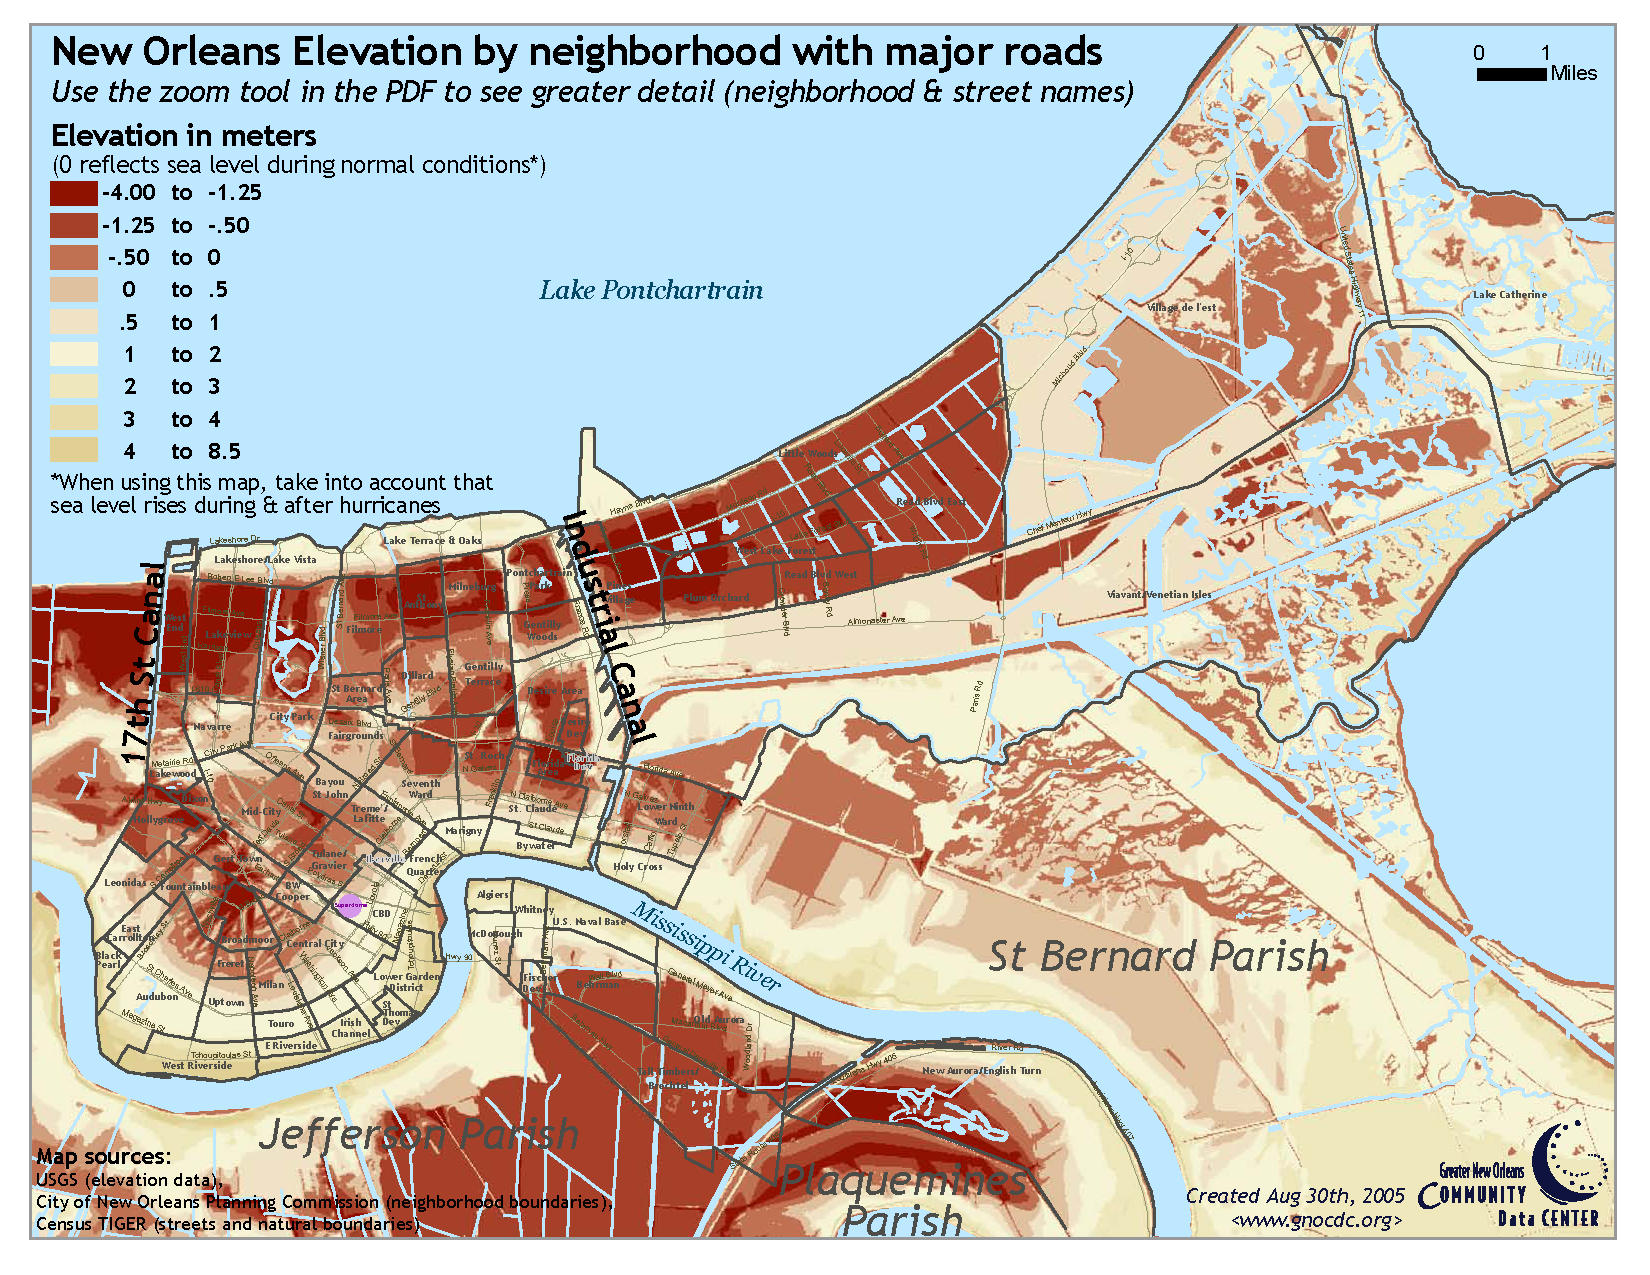 new orleans area zip code map Reference Maps The Data Center new orleans area zip code map